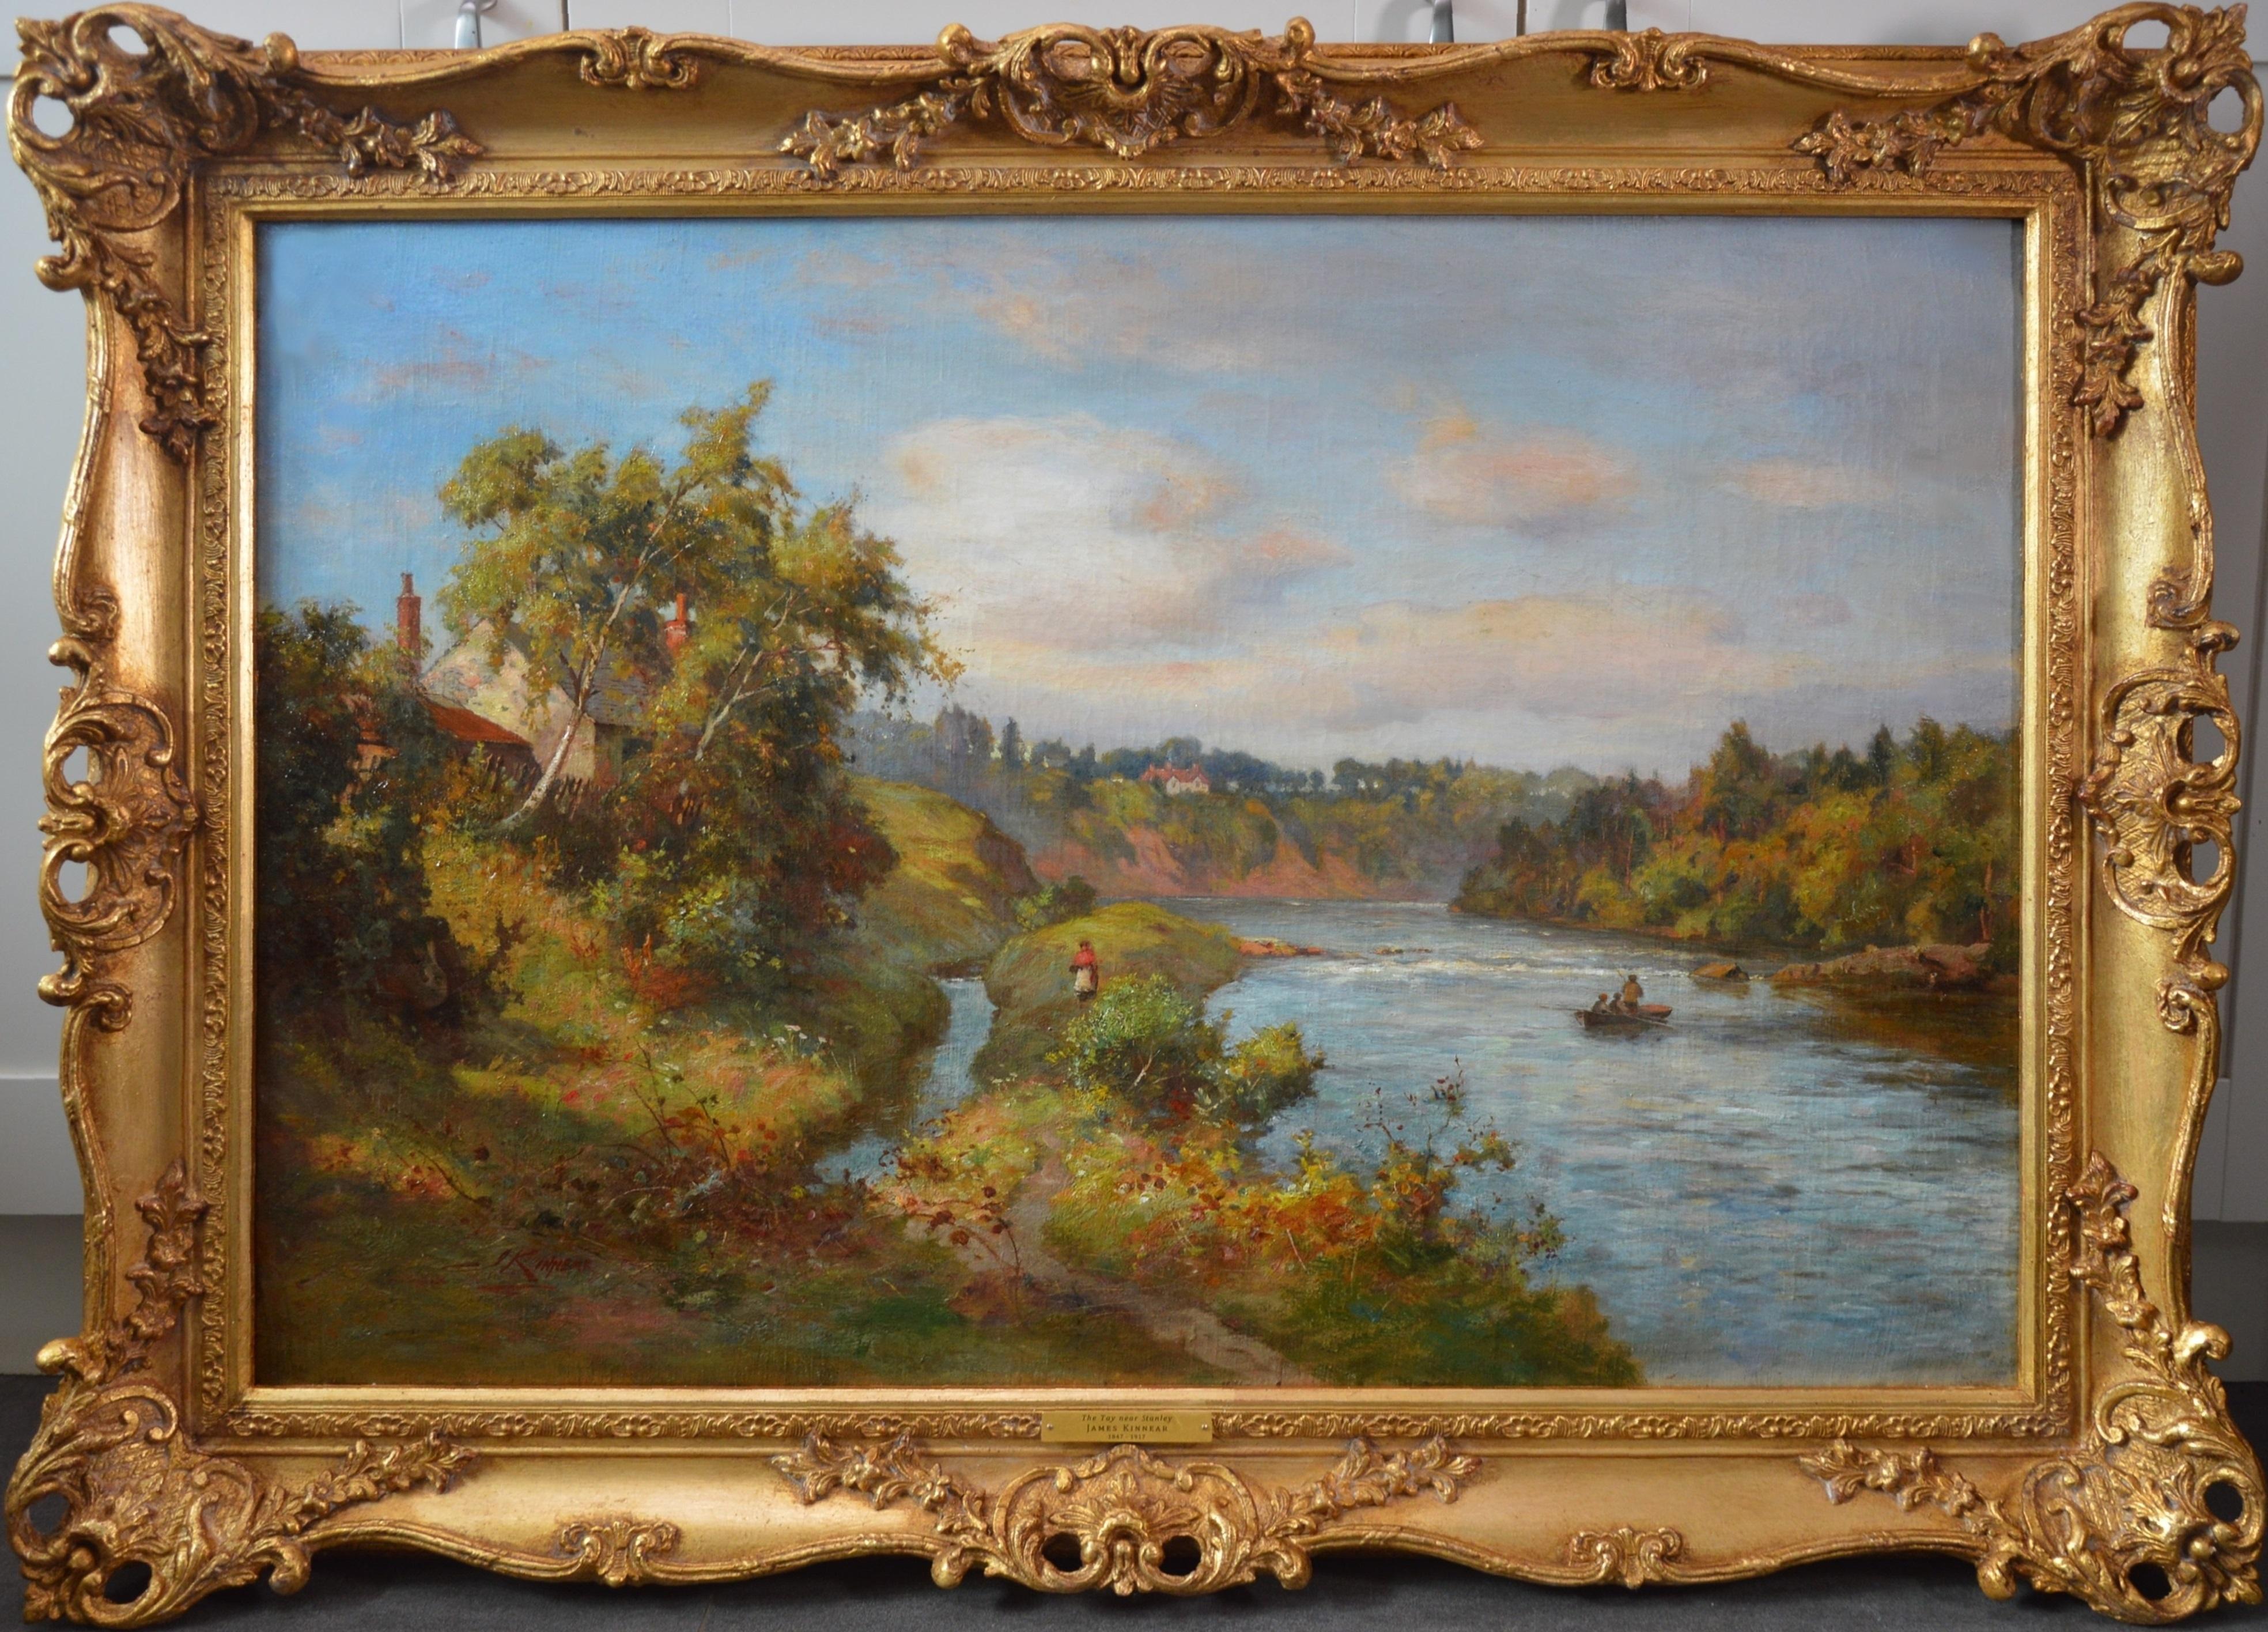 James Kinnear Figurative Painting - The River Tay near Stanley - 19th Century Scottish Oil Painting